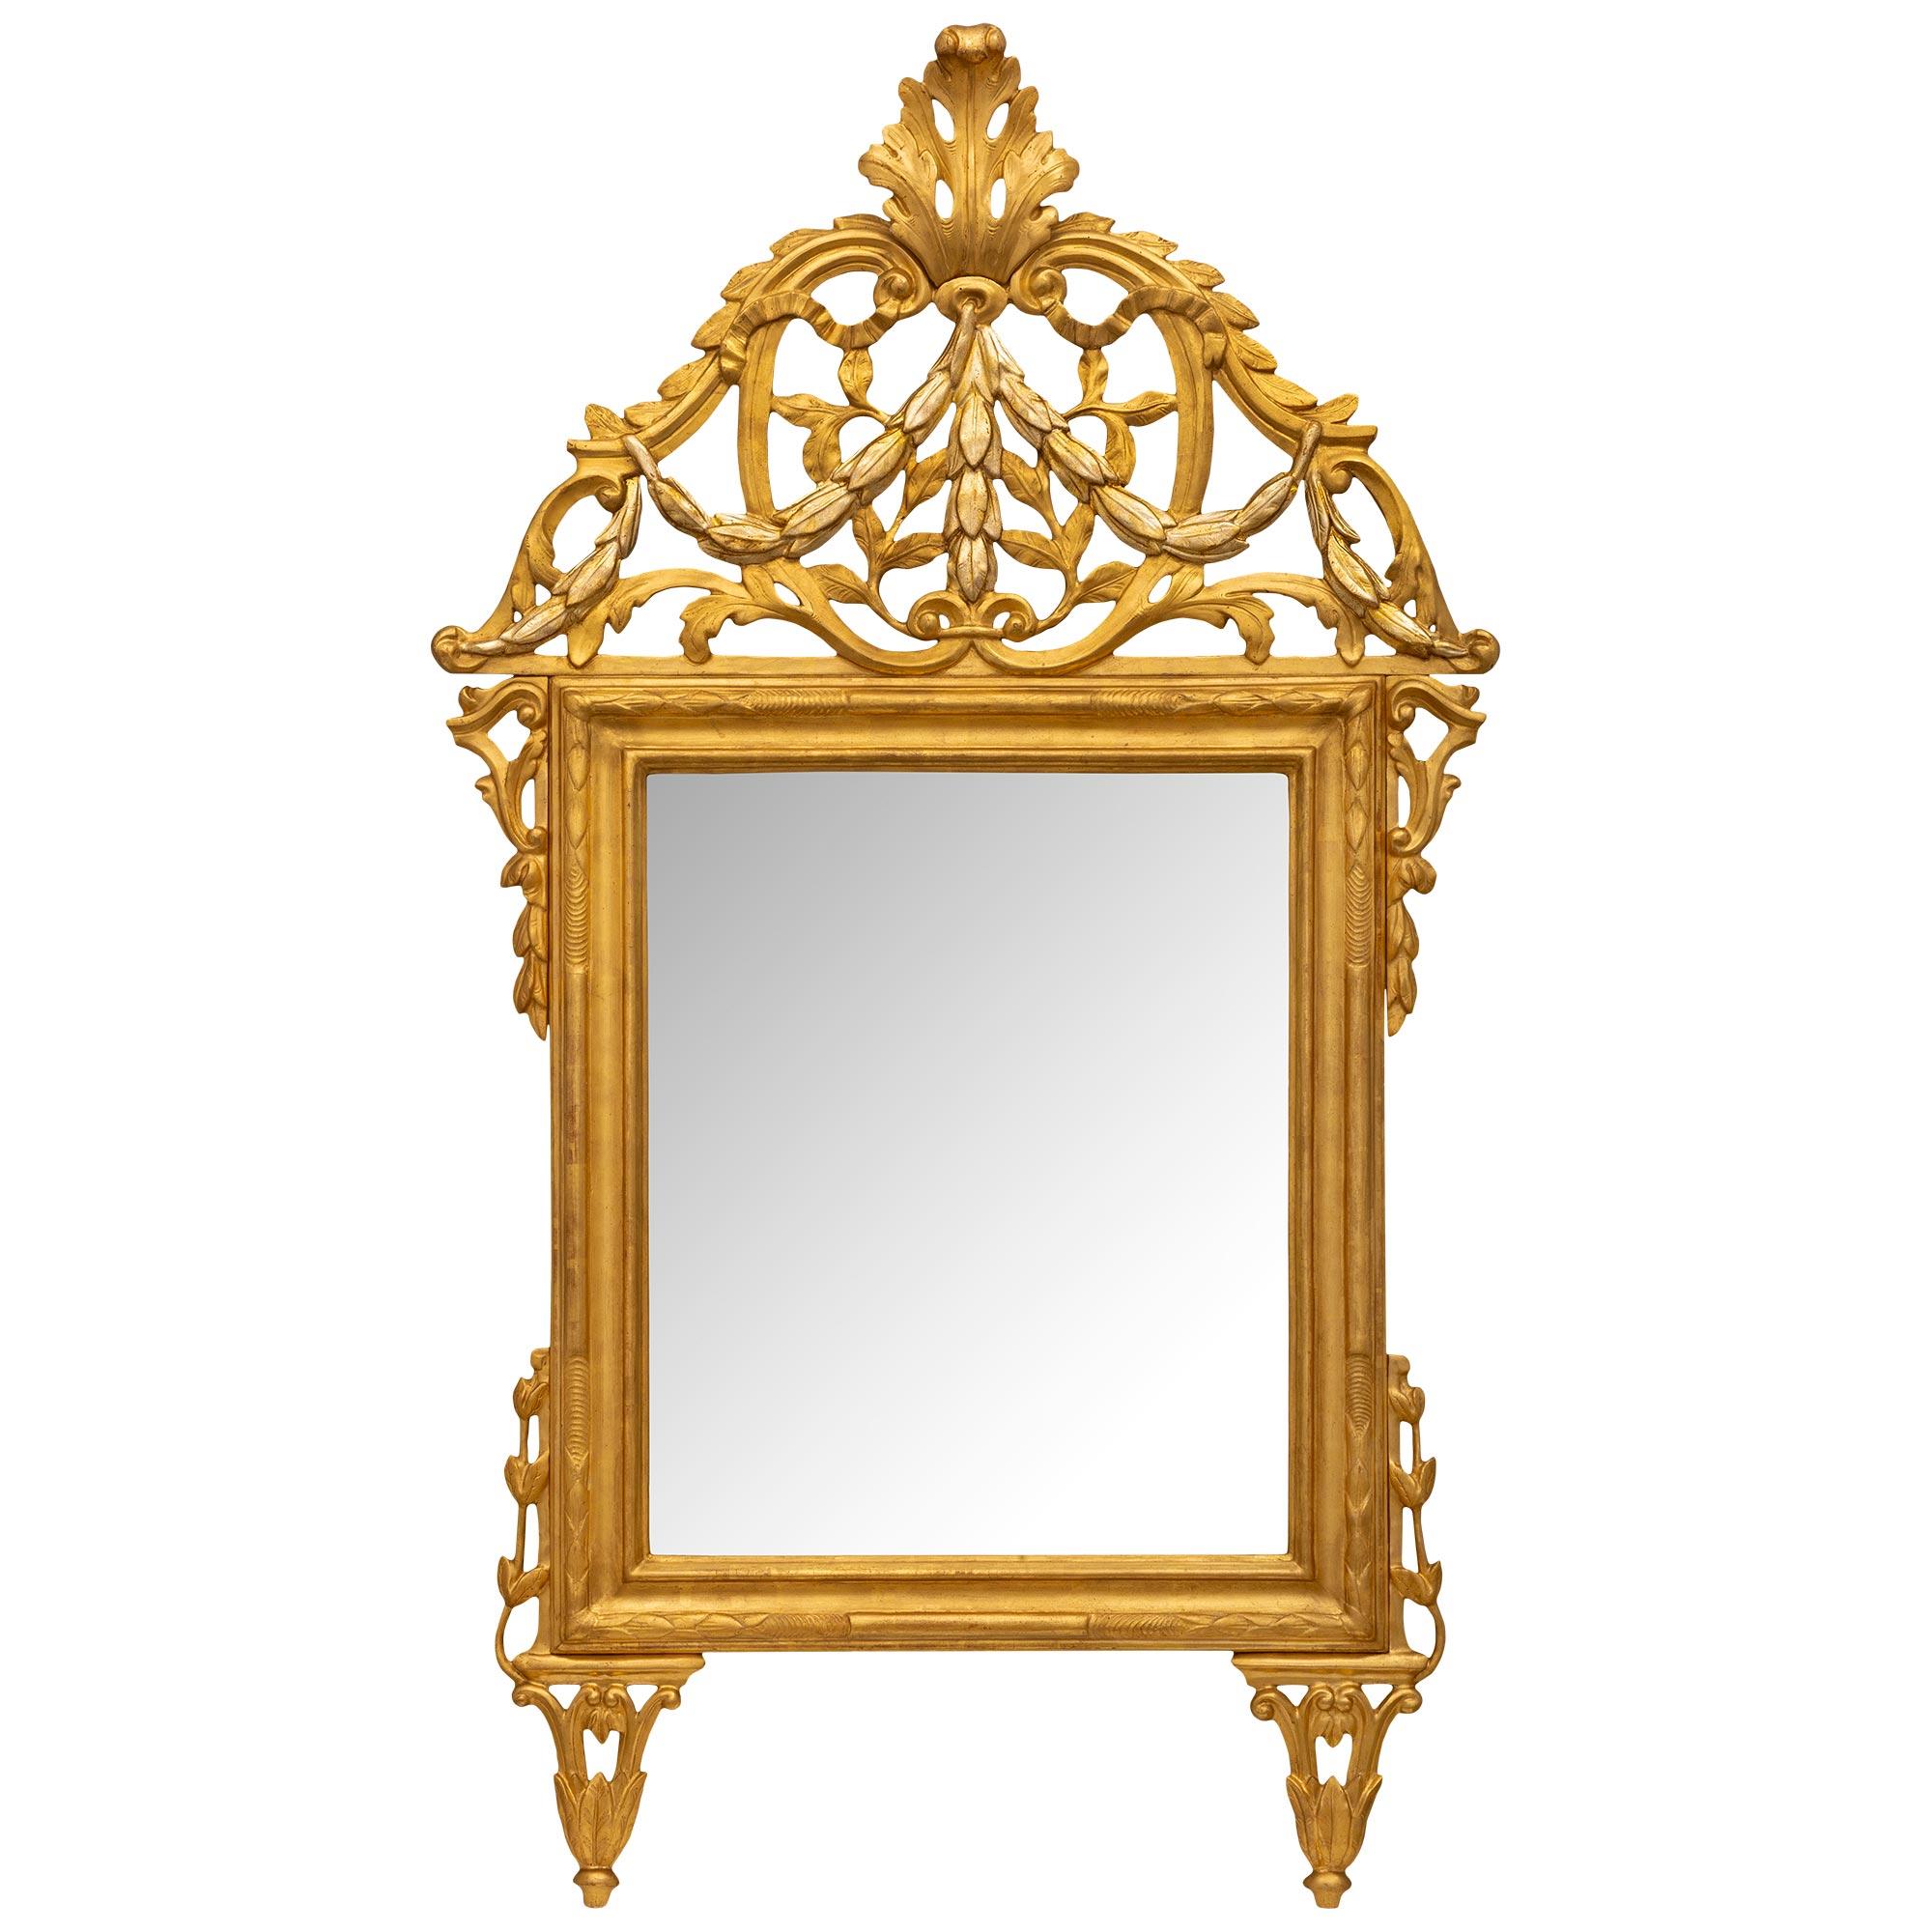 Italian 18th Century Louis XIV Period Giltwood And Silvered Mecca Mirror For Sale 4